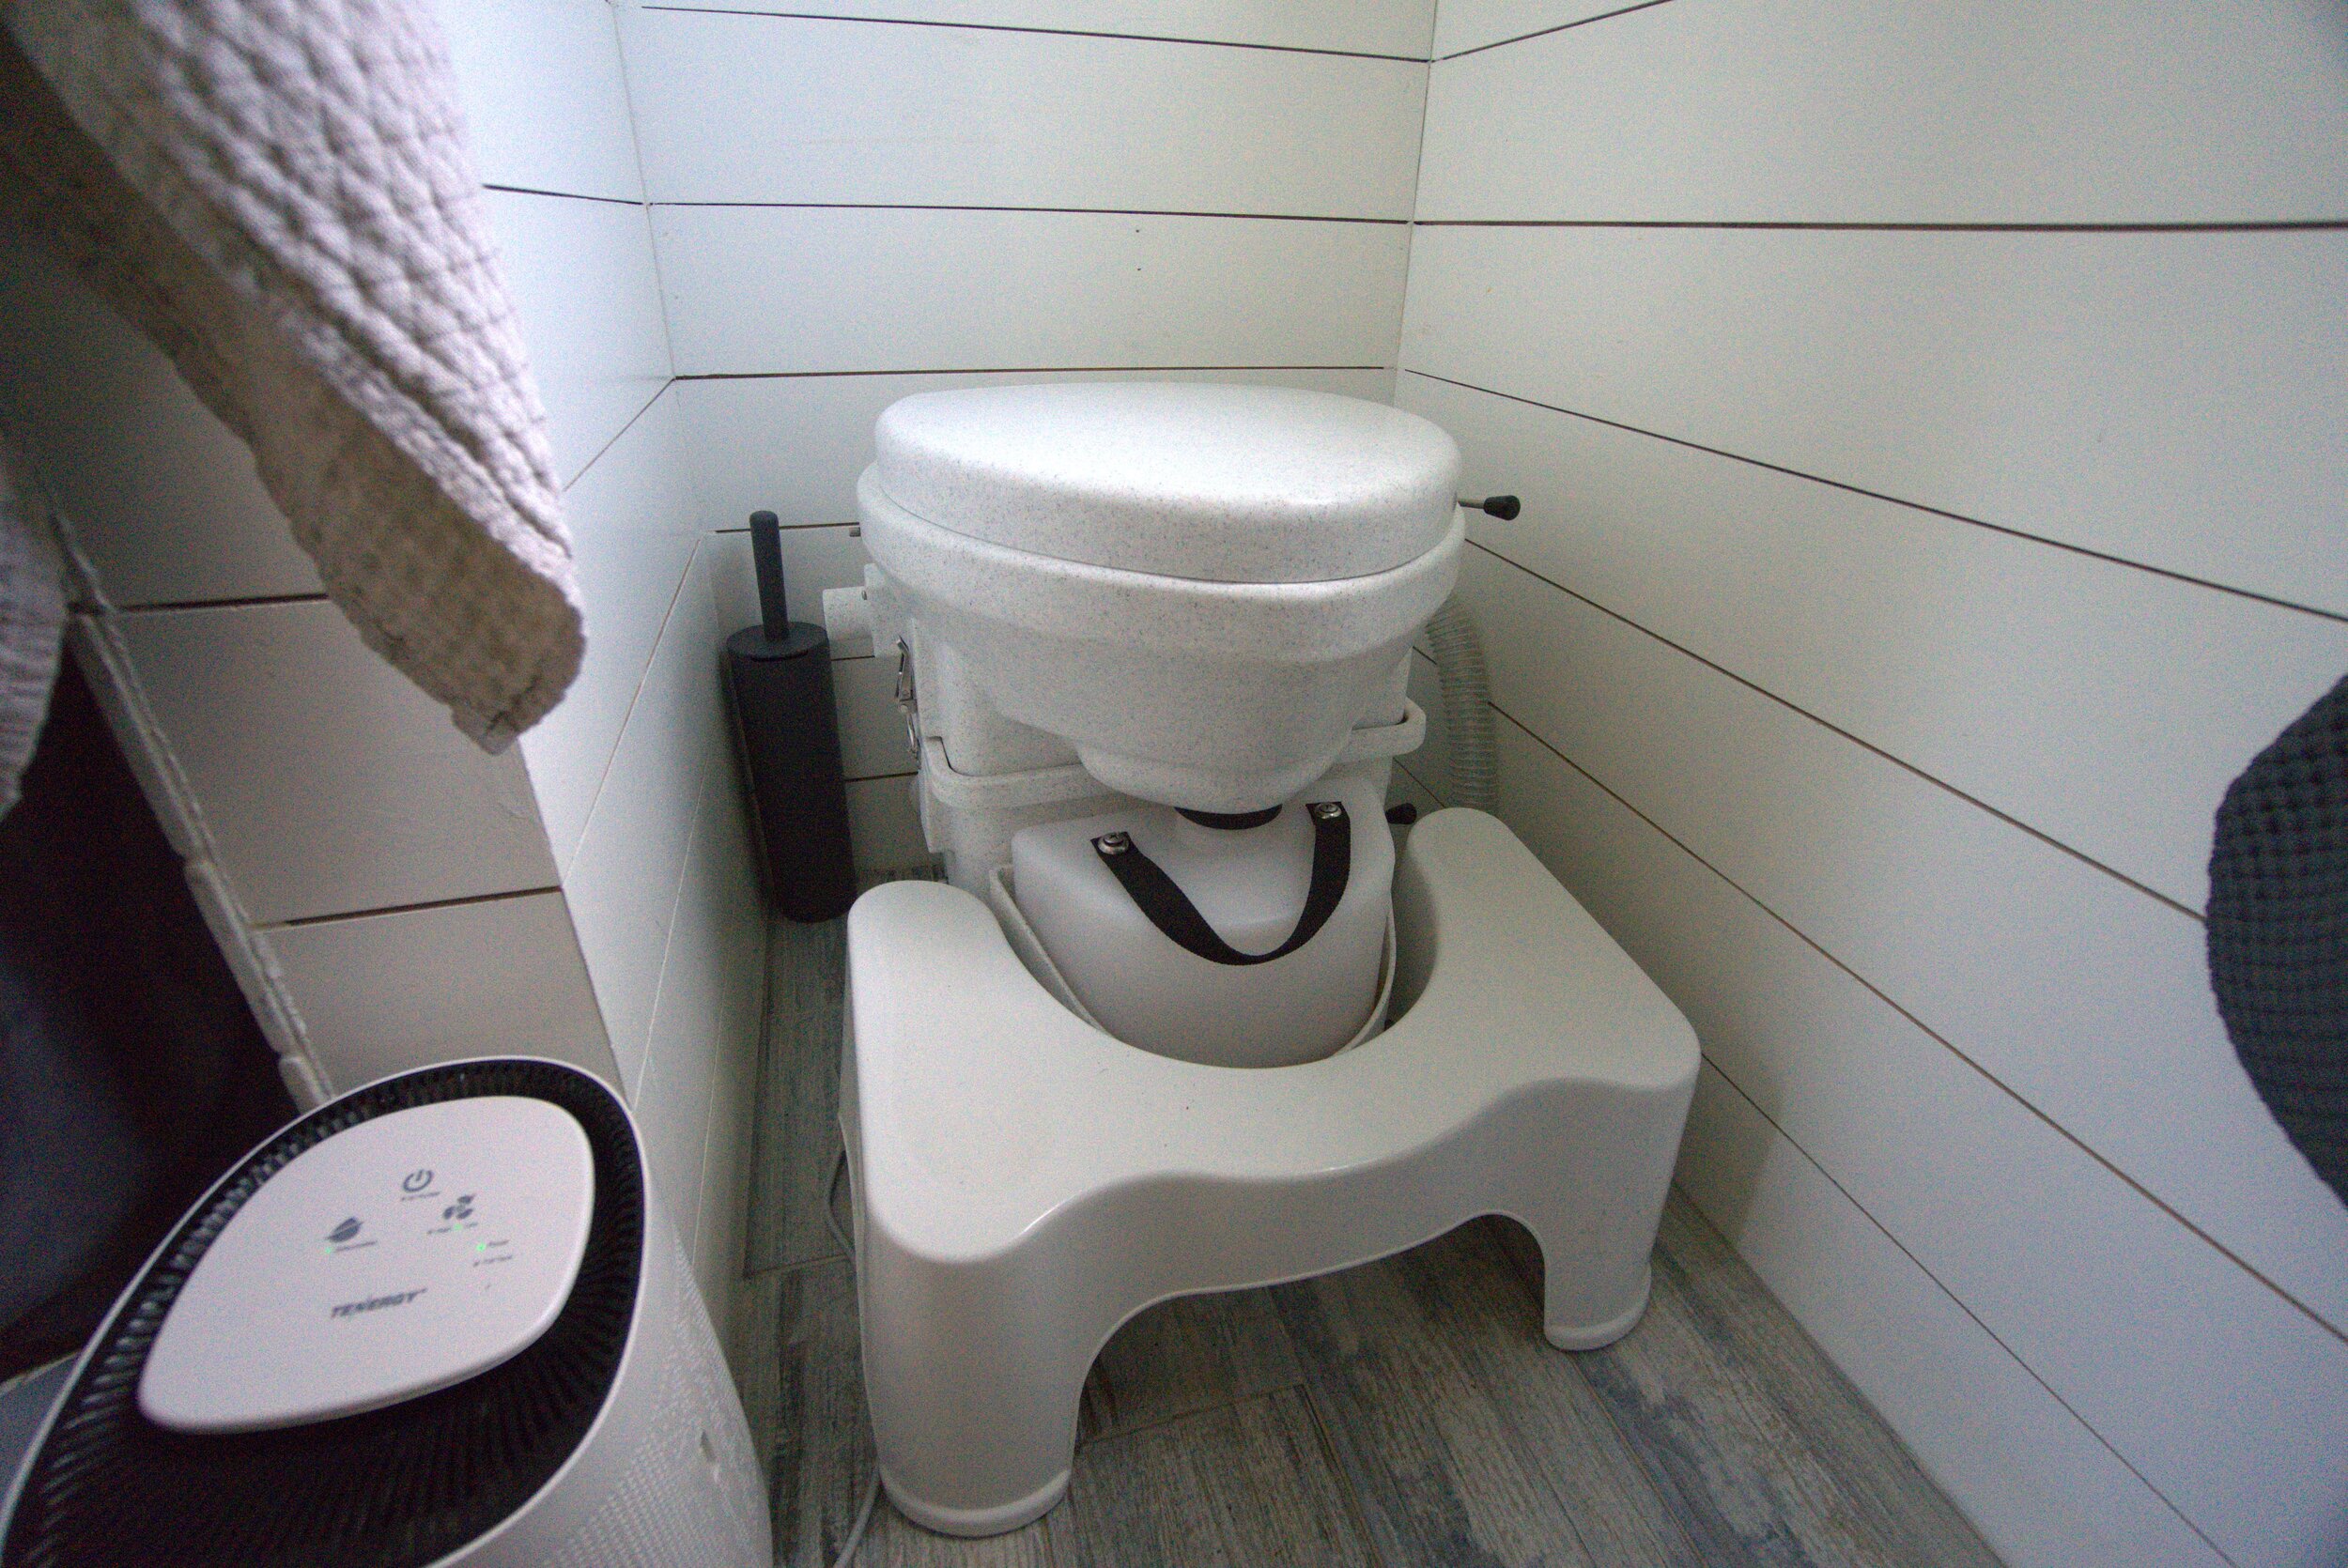 How to Buy the Best Toilet for Your Home